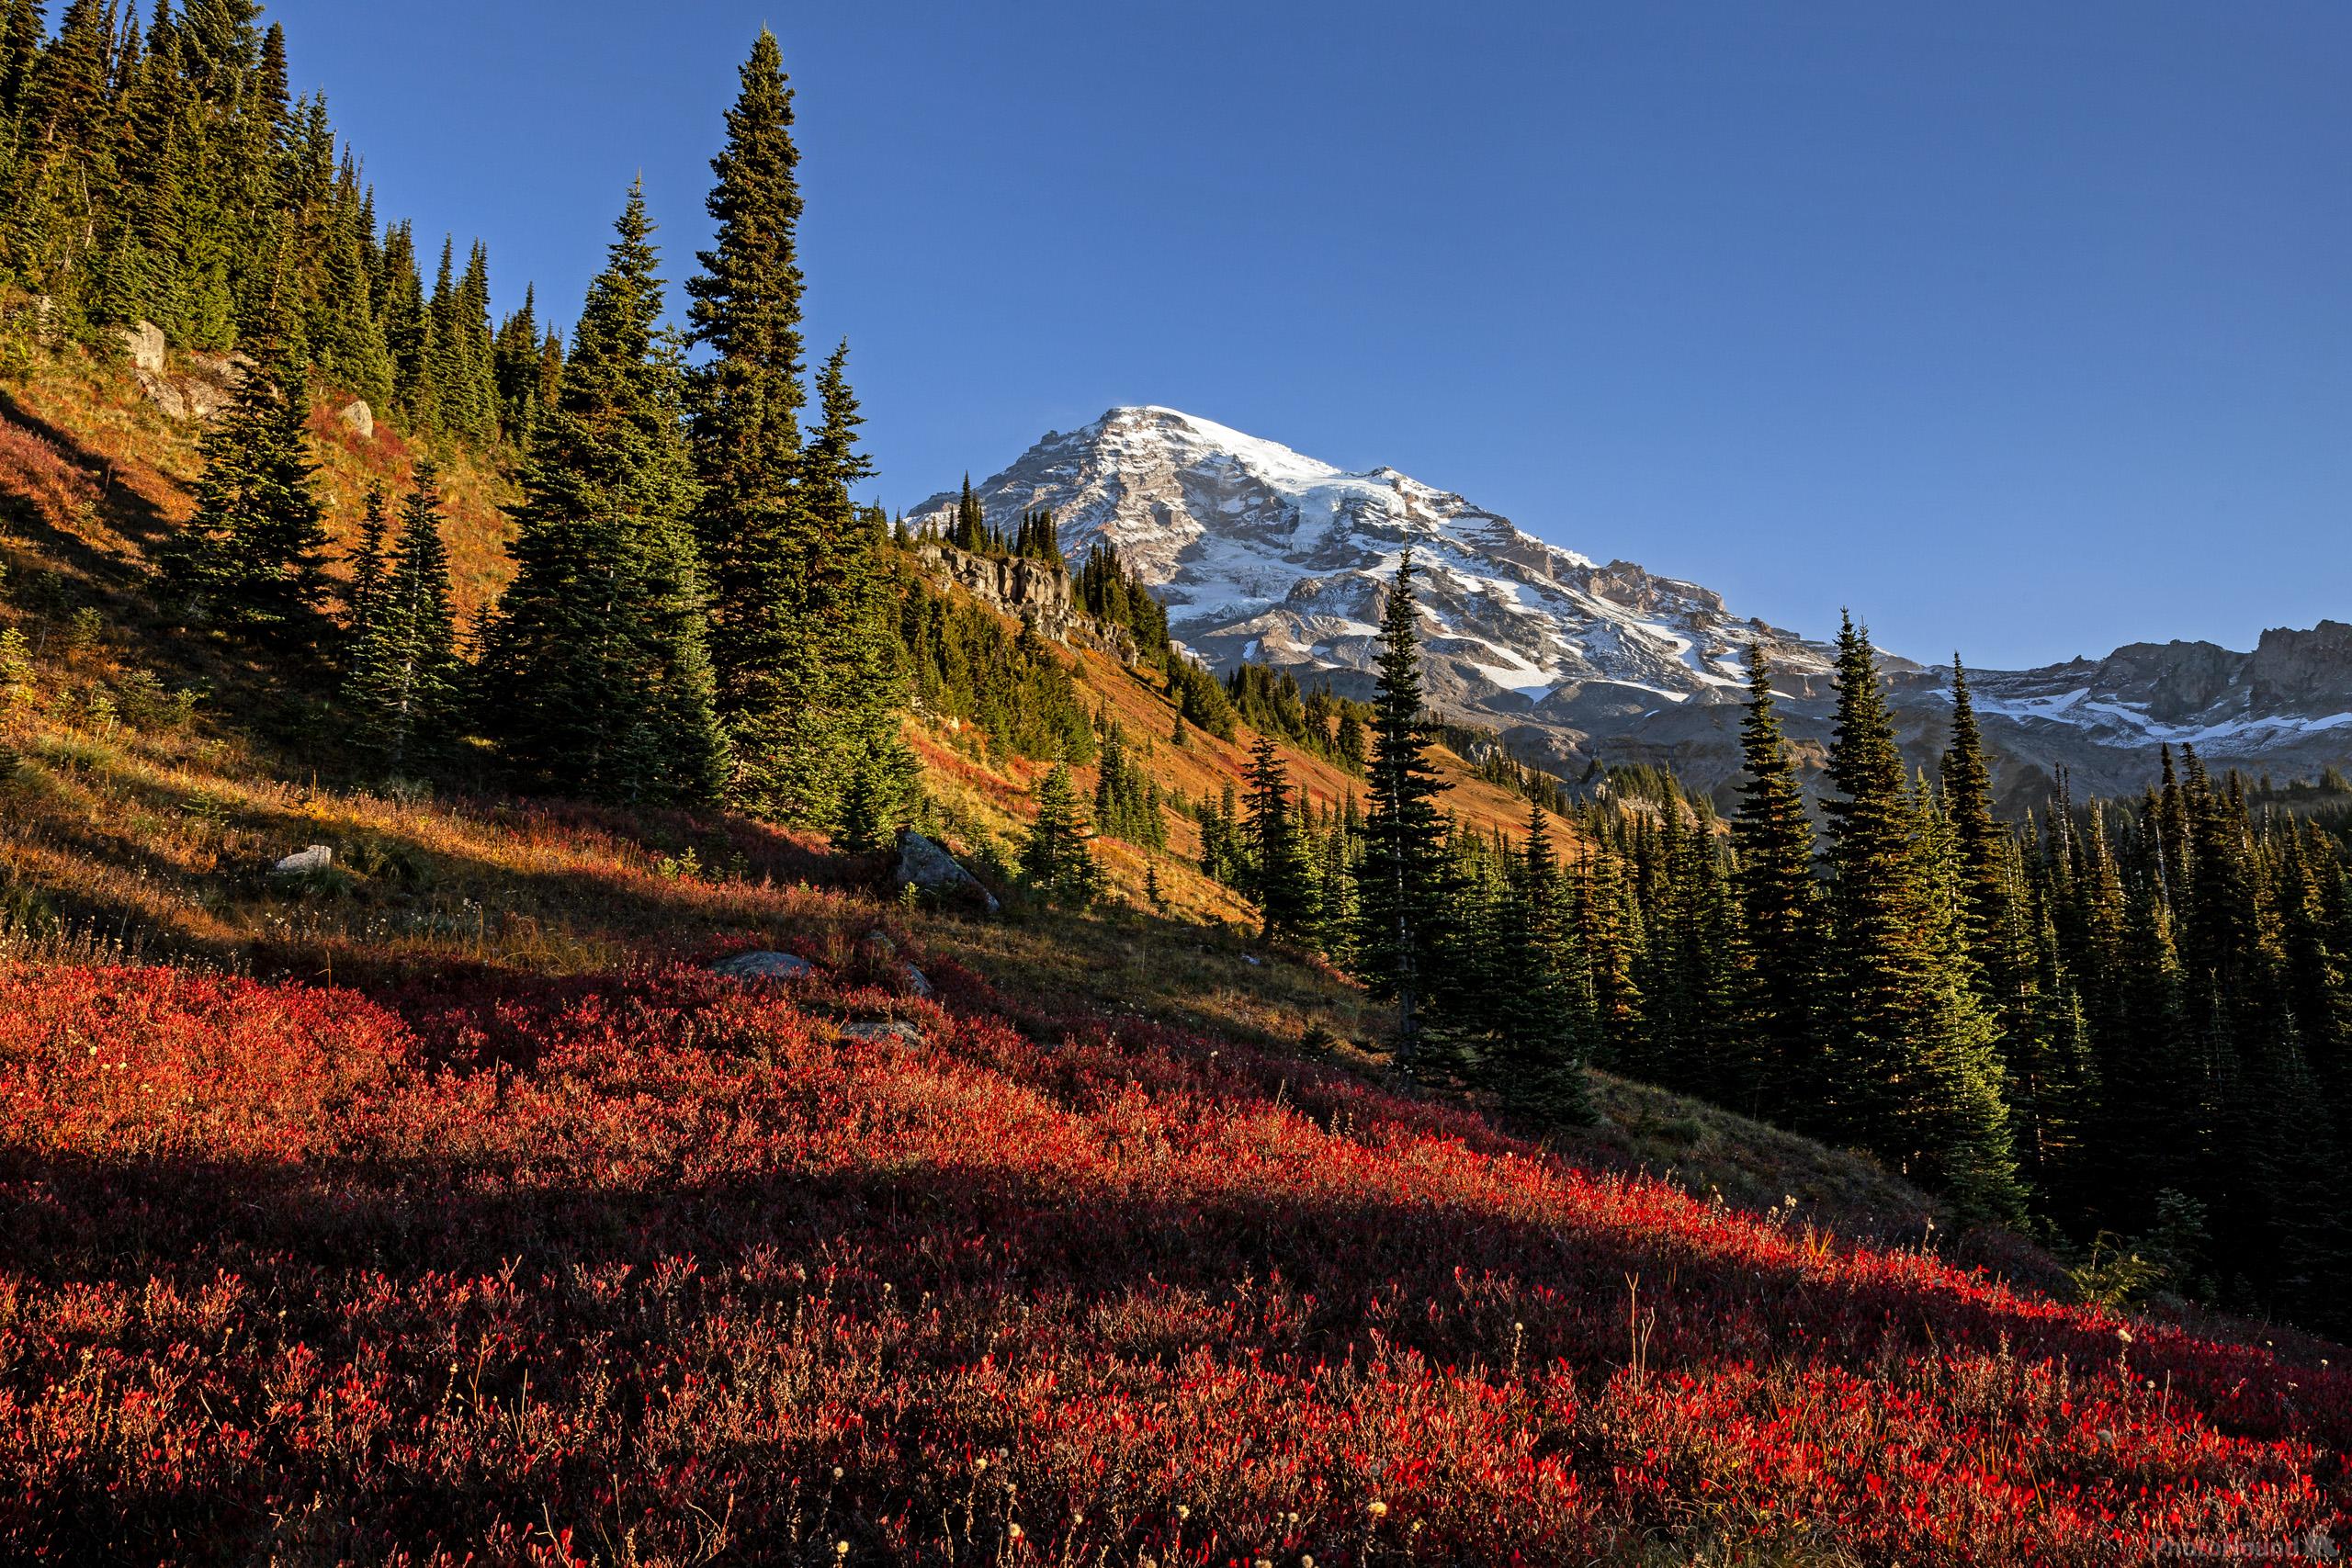 Image of Midred Point, Mount Rainier National Park by T. Kirkendall and V. Spring